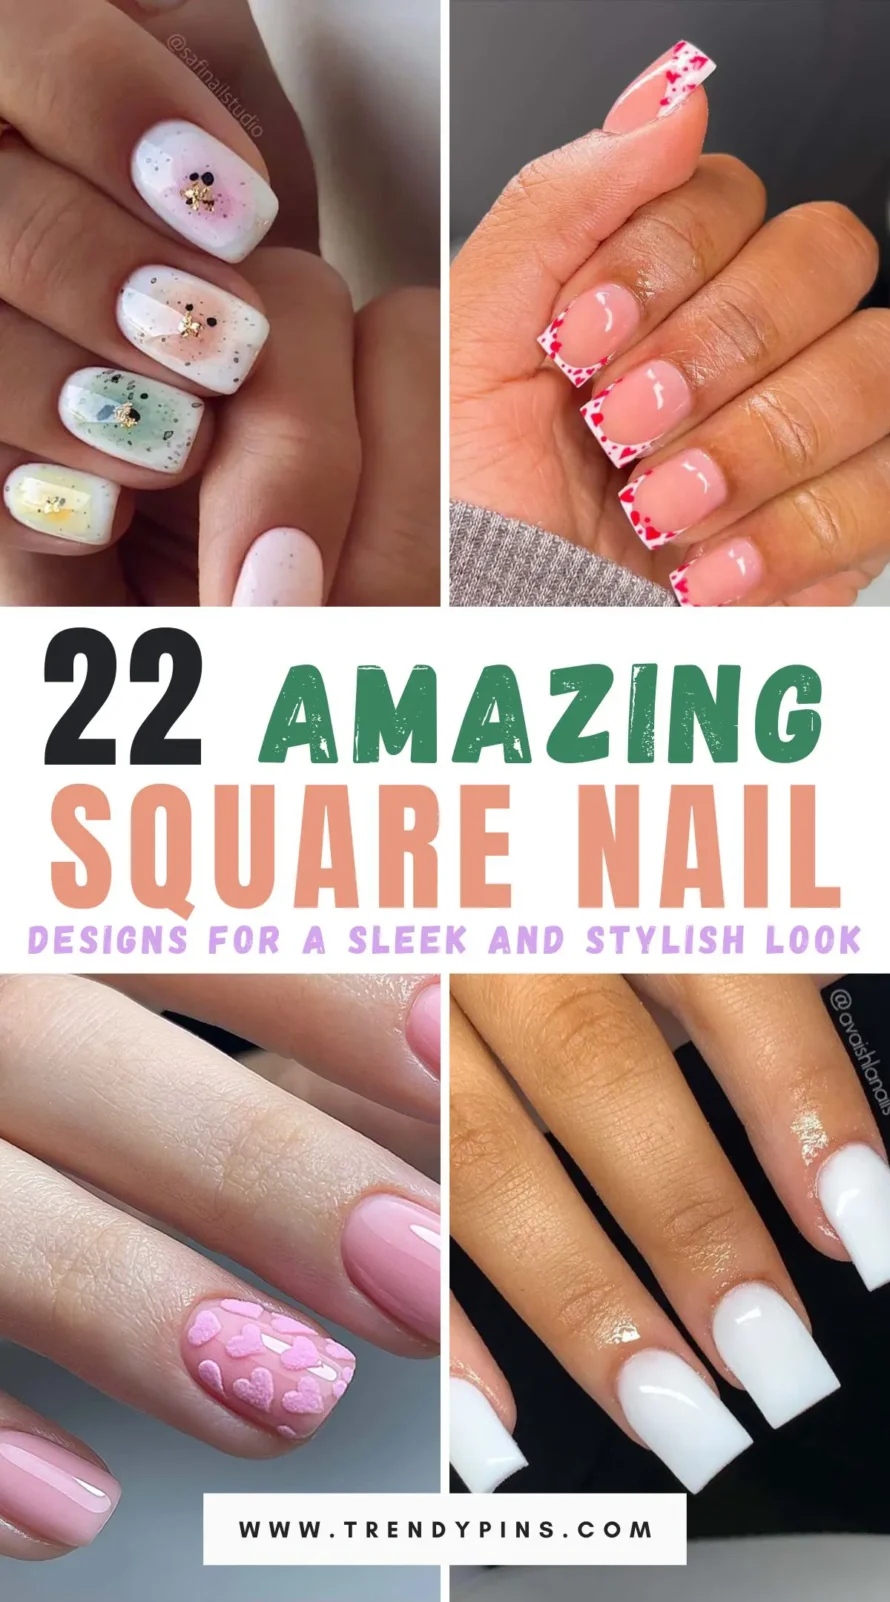 Discover 22 square nail designs that blend elegance and creativity, offering chic and stylish tips for every occasion. Perfect for your next manicure!